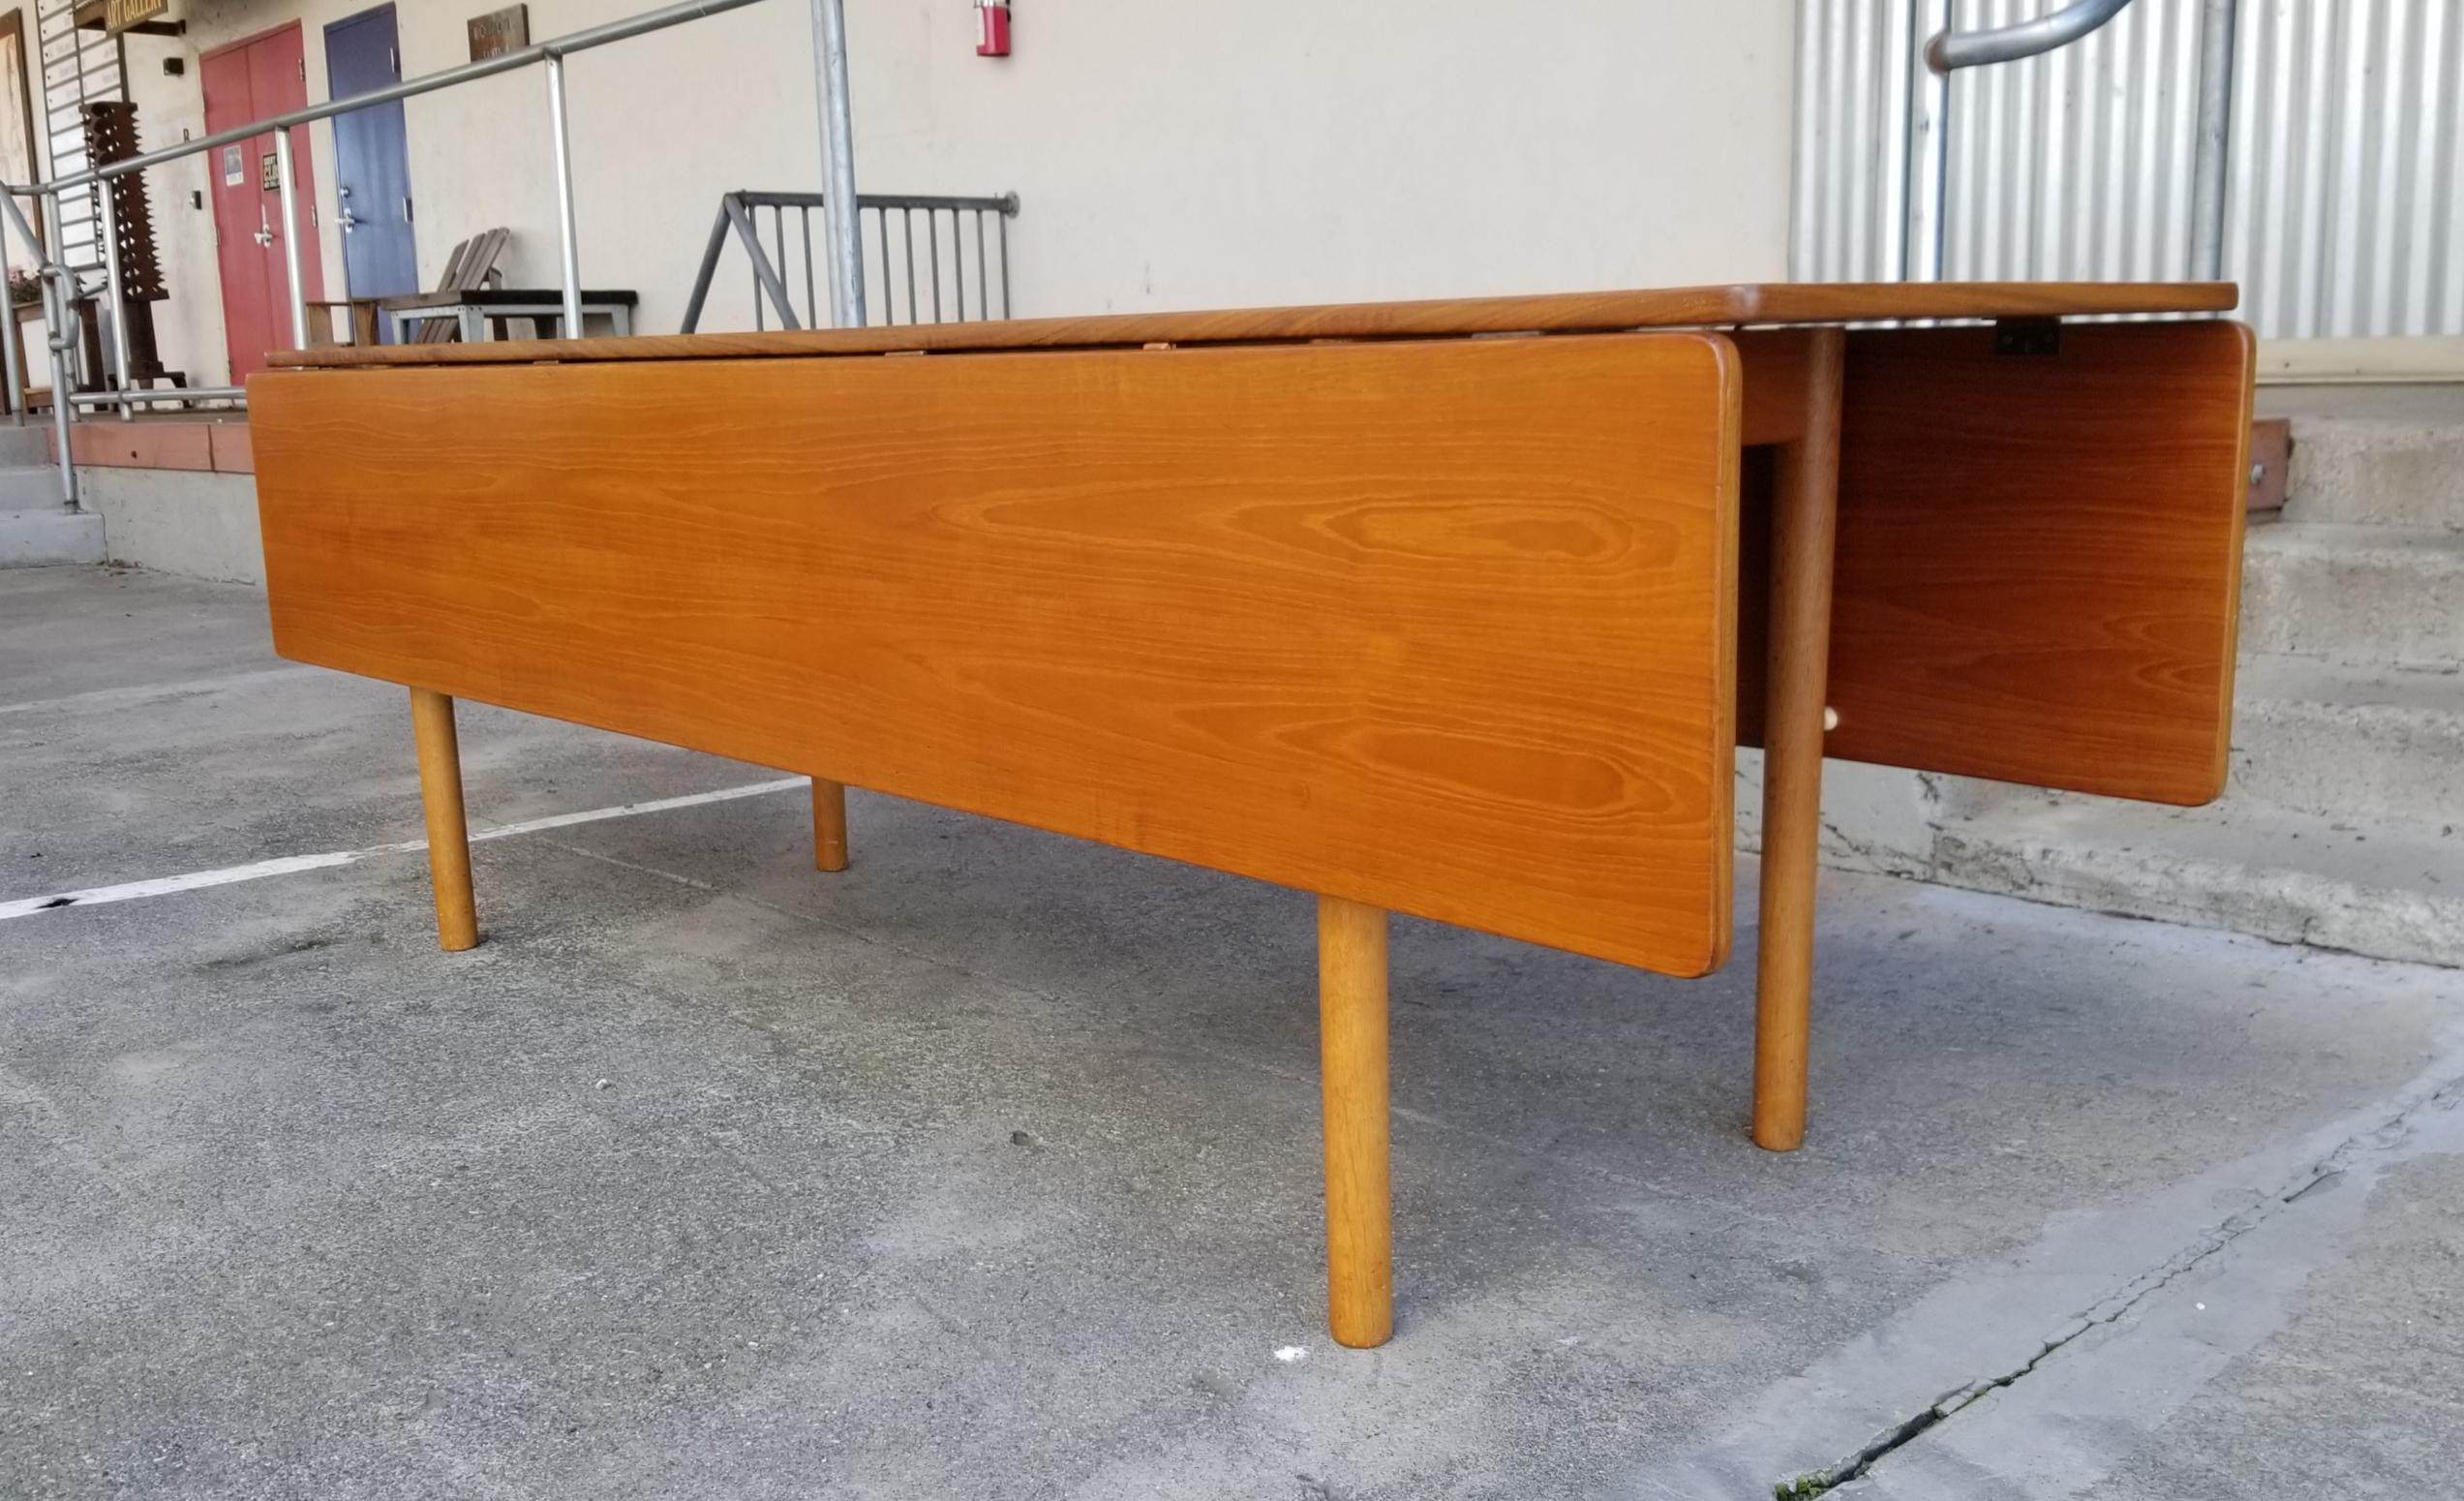 A scarce oversized example of the Børge Mogensen Danish Modern model 840 teak and oak drop leaf dining table measuring a massive 83.88 inches in length. This table would function very well as a console or sofa table. Fully extended measures 83.88